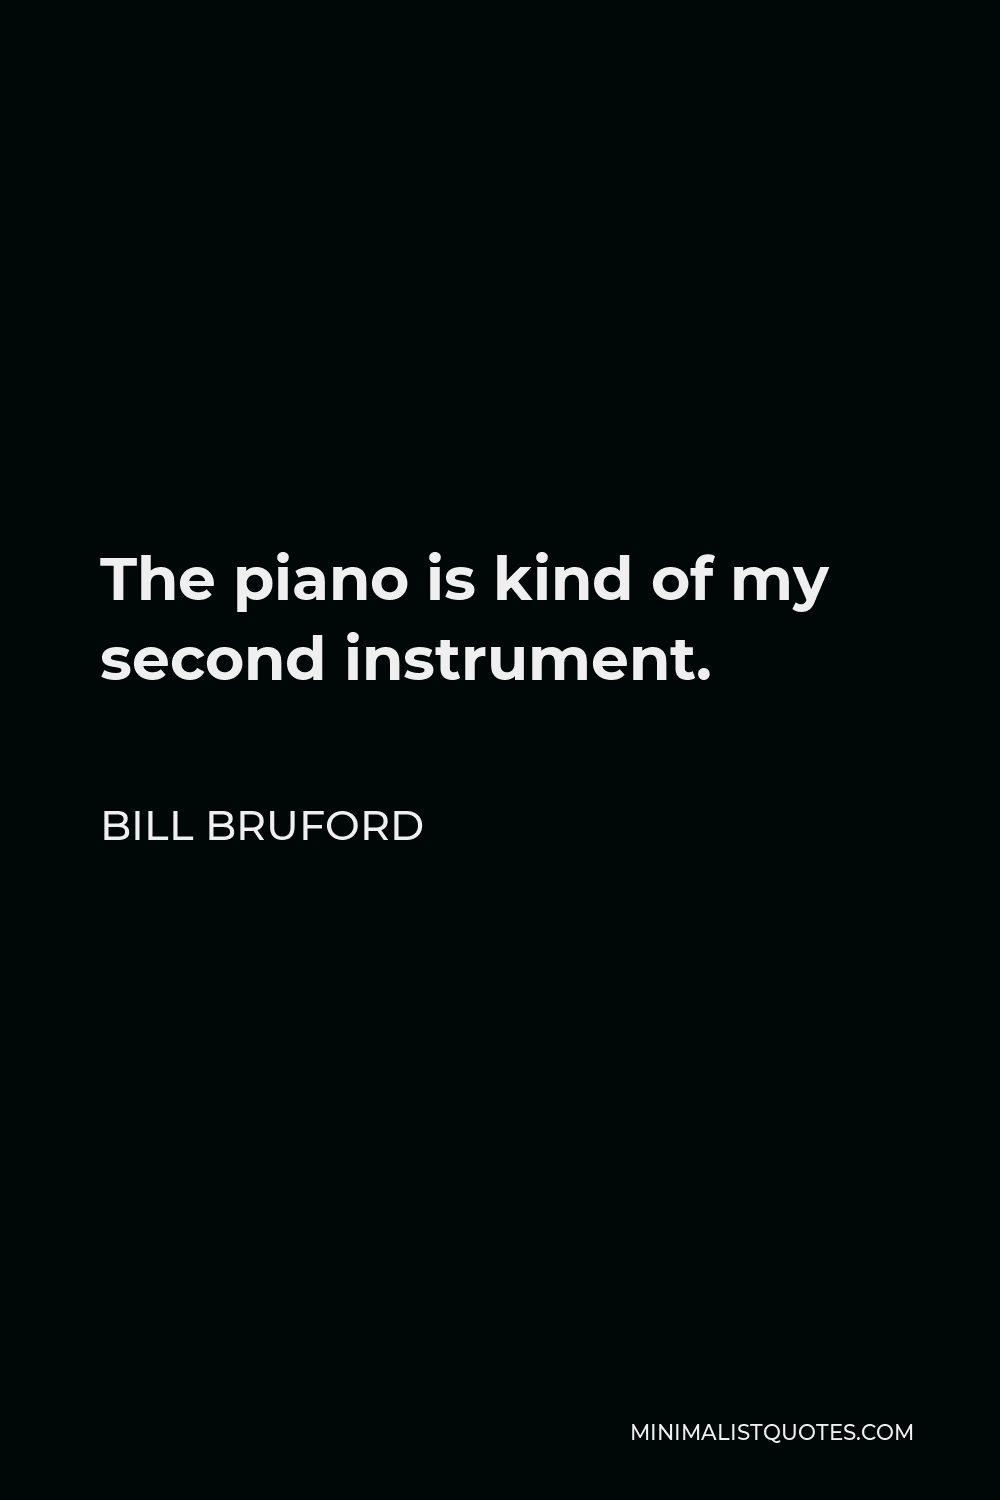 Bill Bruford Quote - The piano is kind of my second instrument.